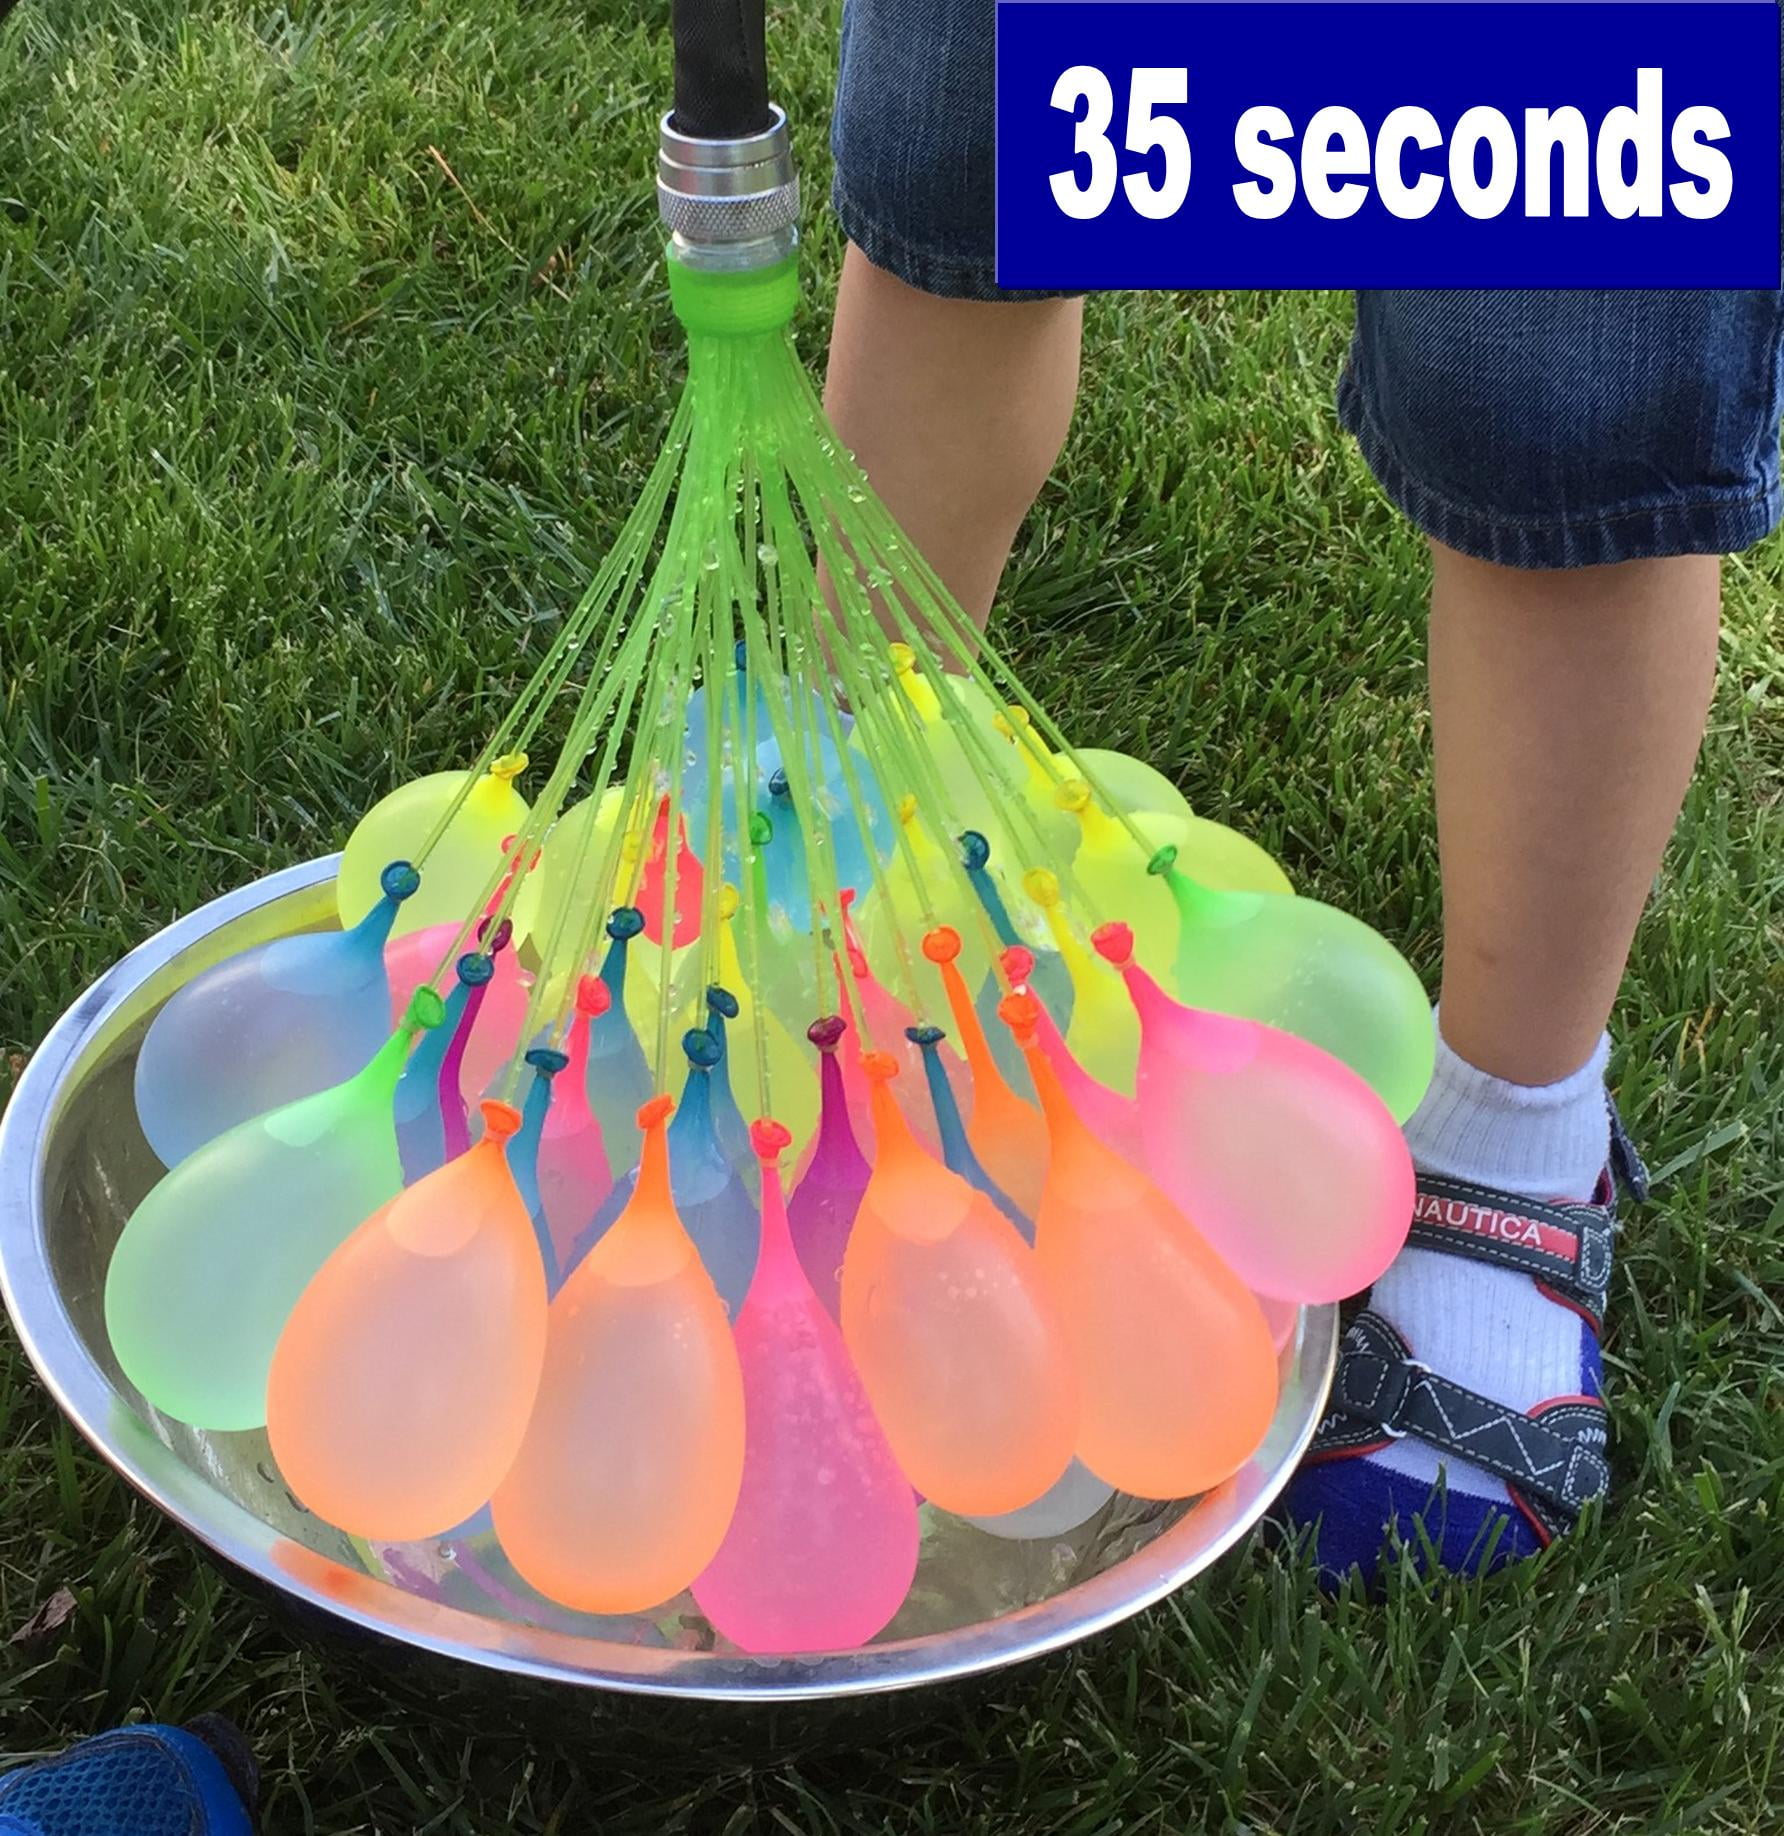 Self Sealing Water Balloons 444 Balloons with 12 Packs For Kids and Adults Party Self Sealing Ballons Easy Quick Fill in 60 Seconds Summer Splash Fun Outdoor Backyard Water Bomb Fight Games kY44